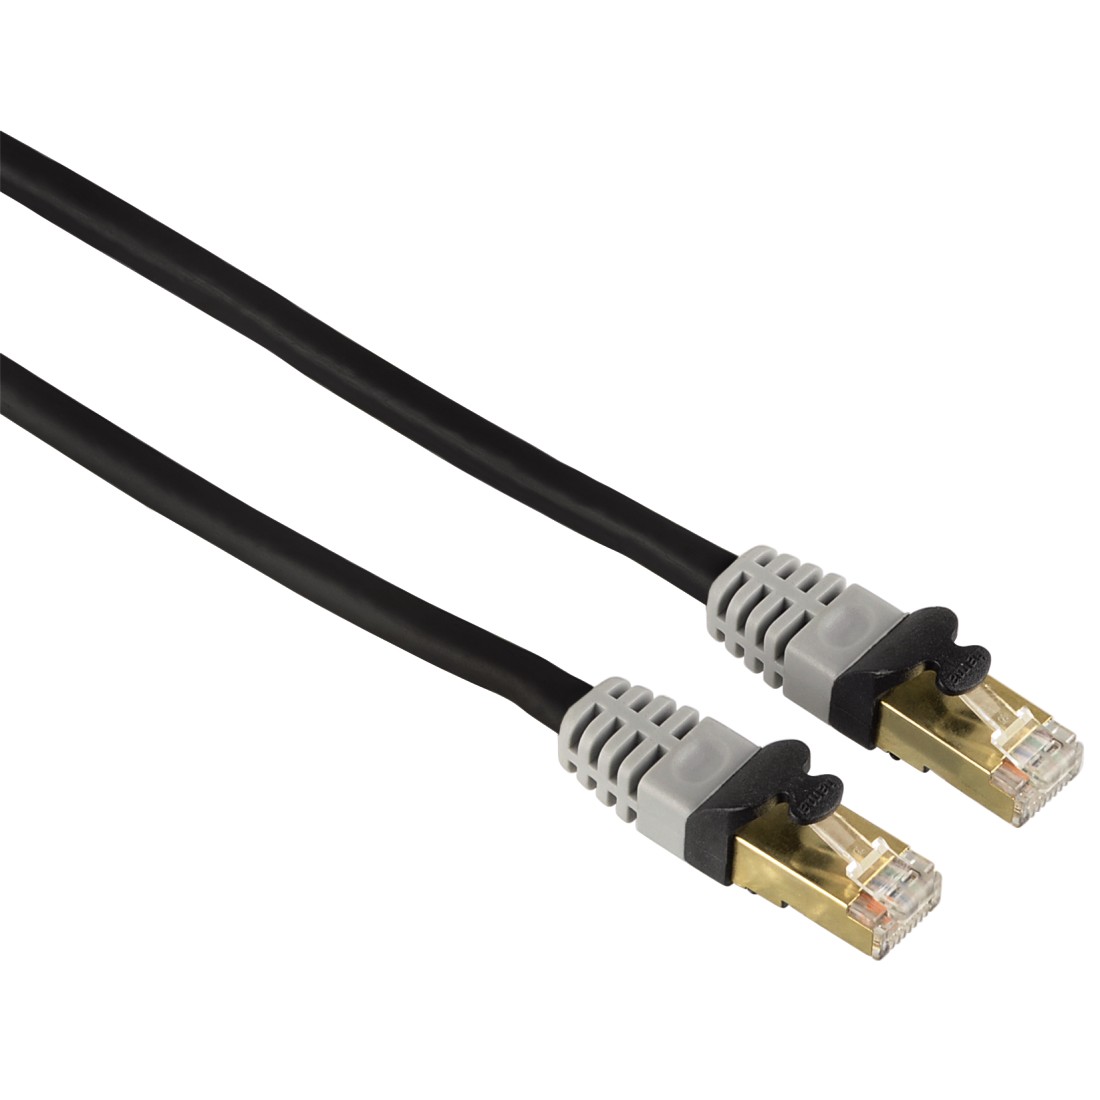 00053754 Hama CAT 6 Network Cable STP, gold-plated, double shielded, 10.00 m